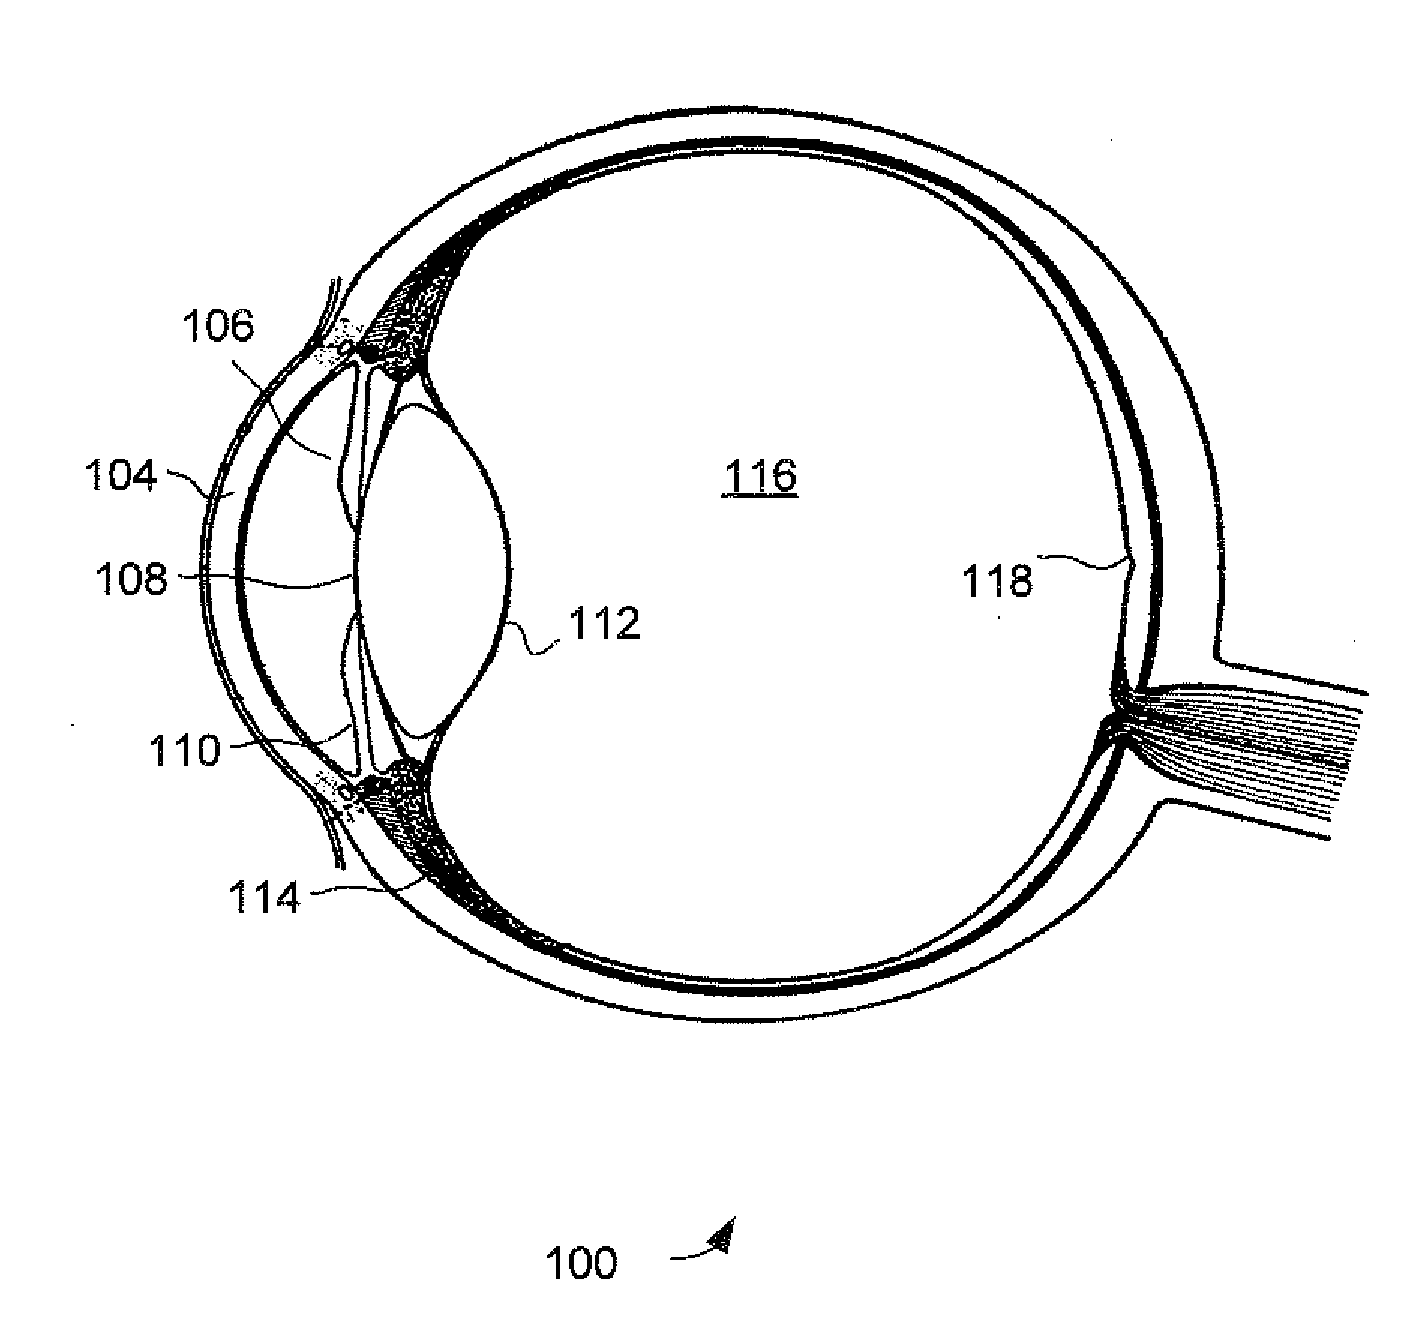 System and method for ocular aberrometry and topography using plenoptic imaging